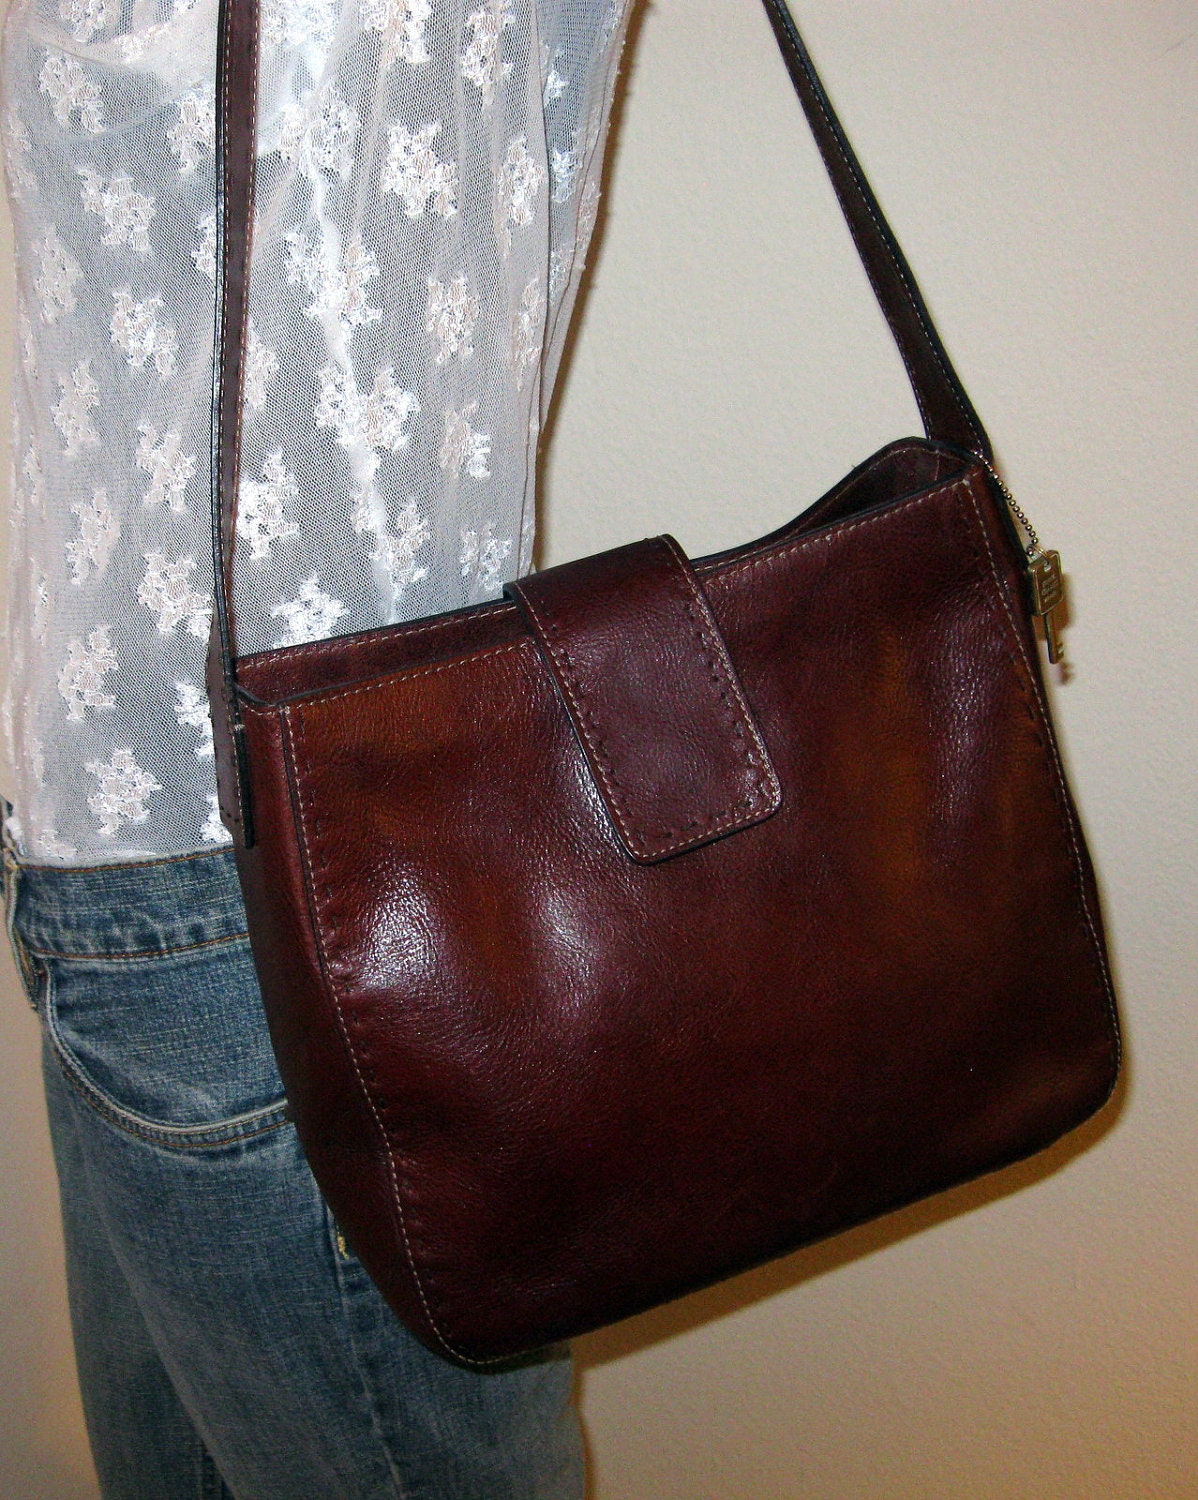 Fossil Sedona tote bag purse in glazed leather vintage